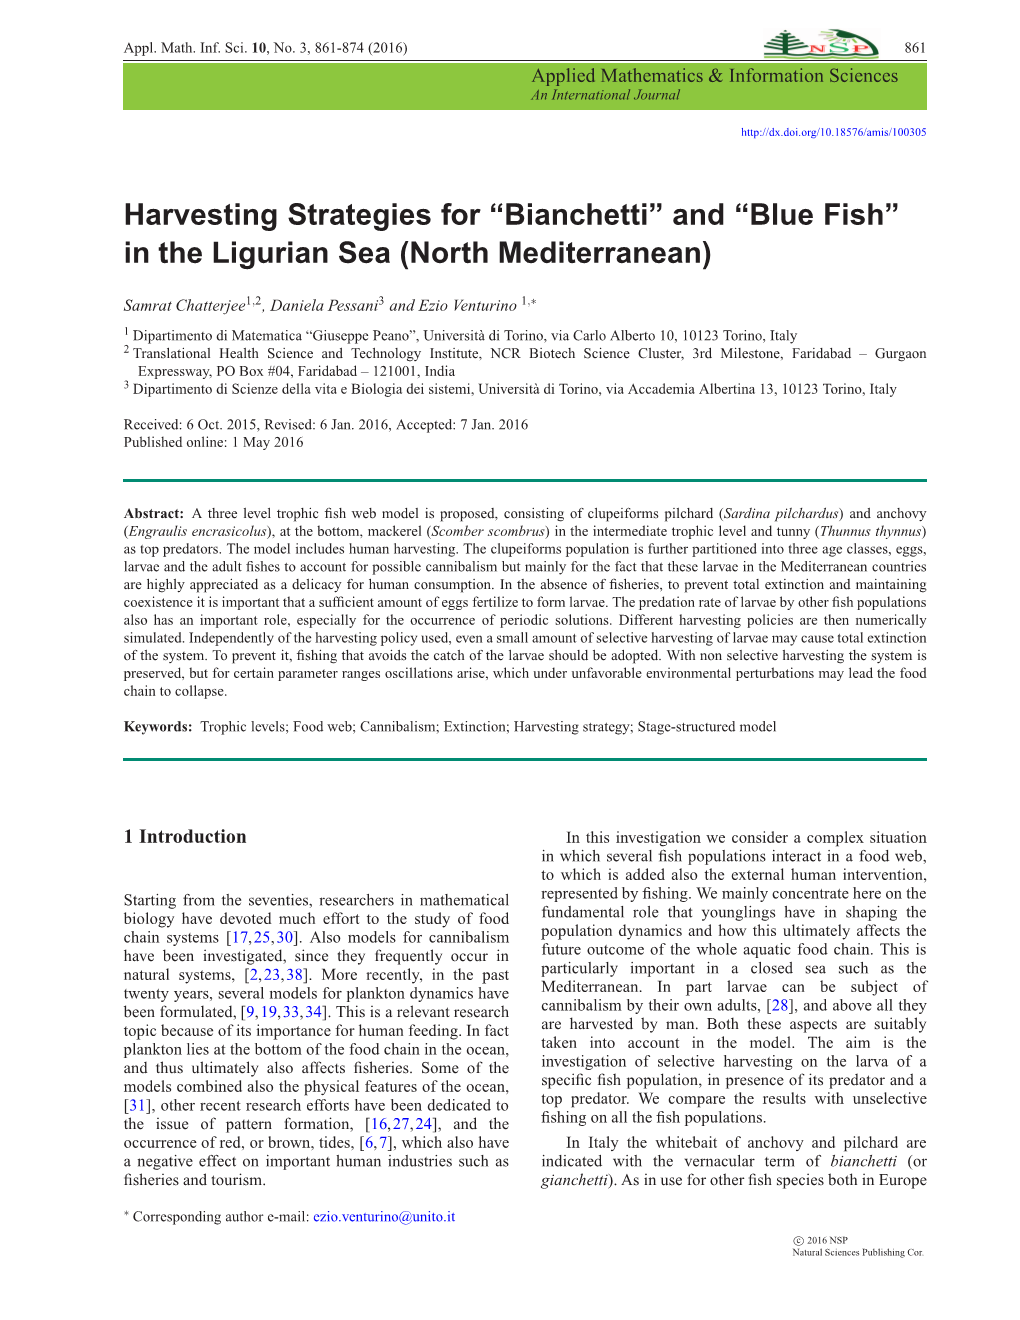 Harvesting Strategies for “Bianchetti” and “Blue Fish” in the Ligurian Sea (North Mediterranean)